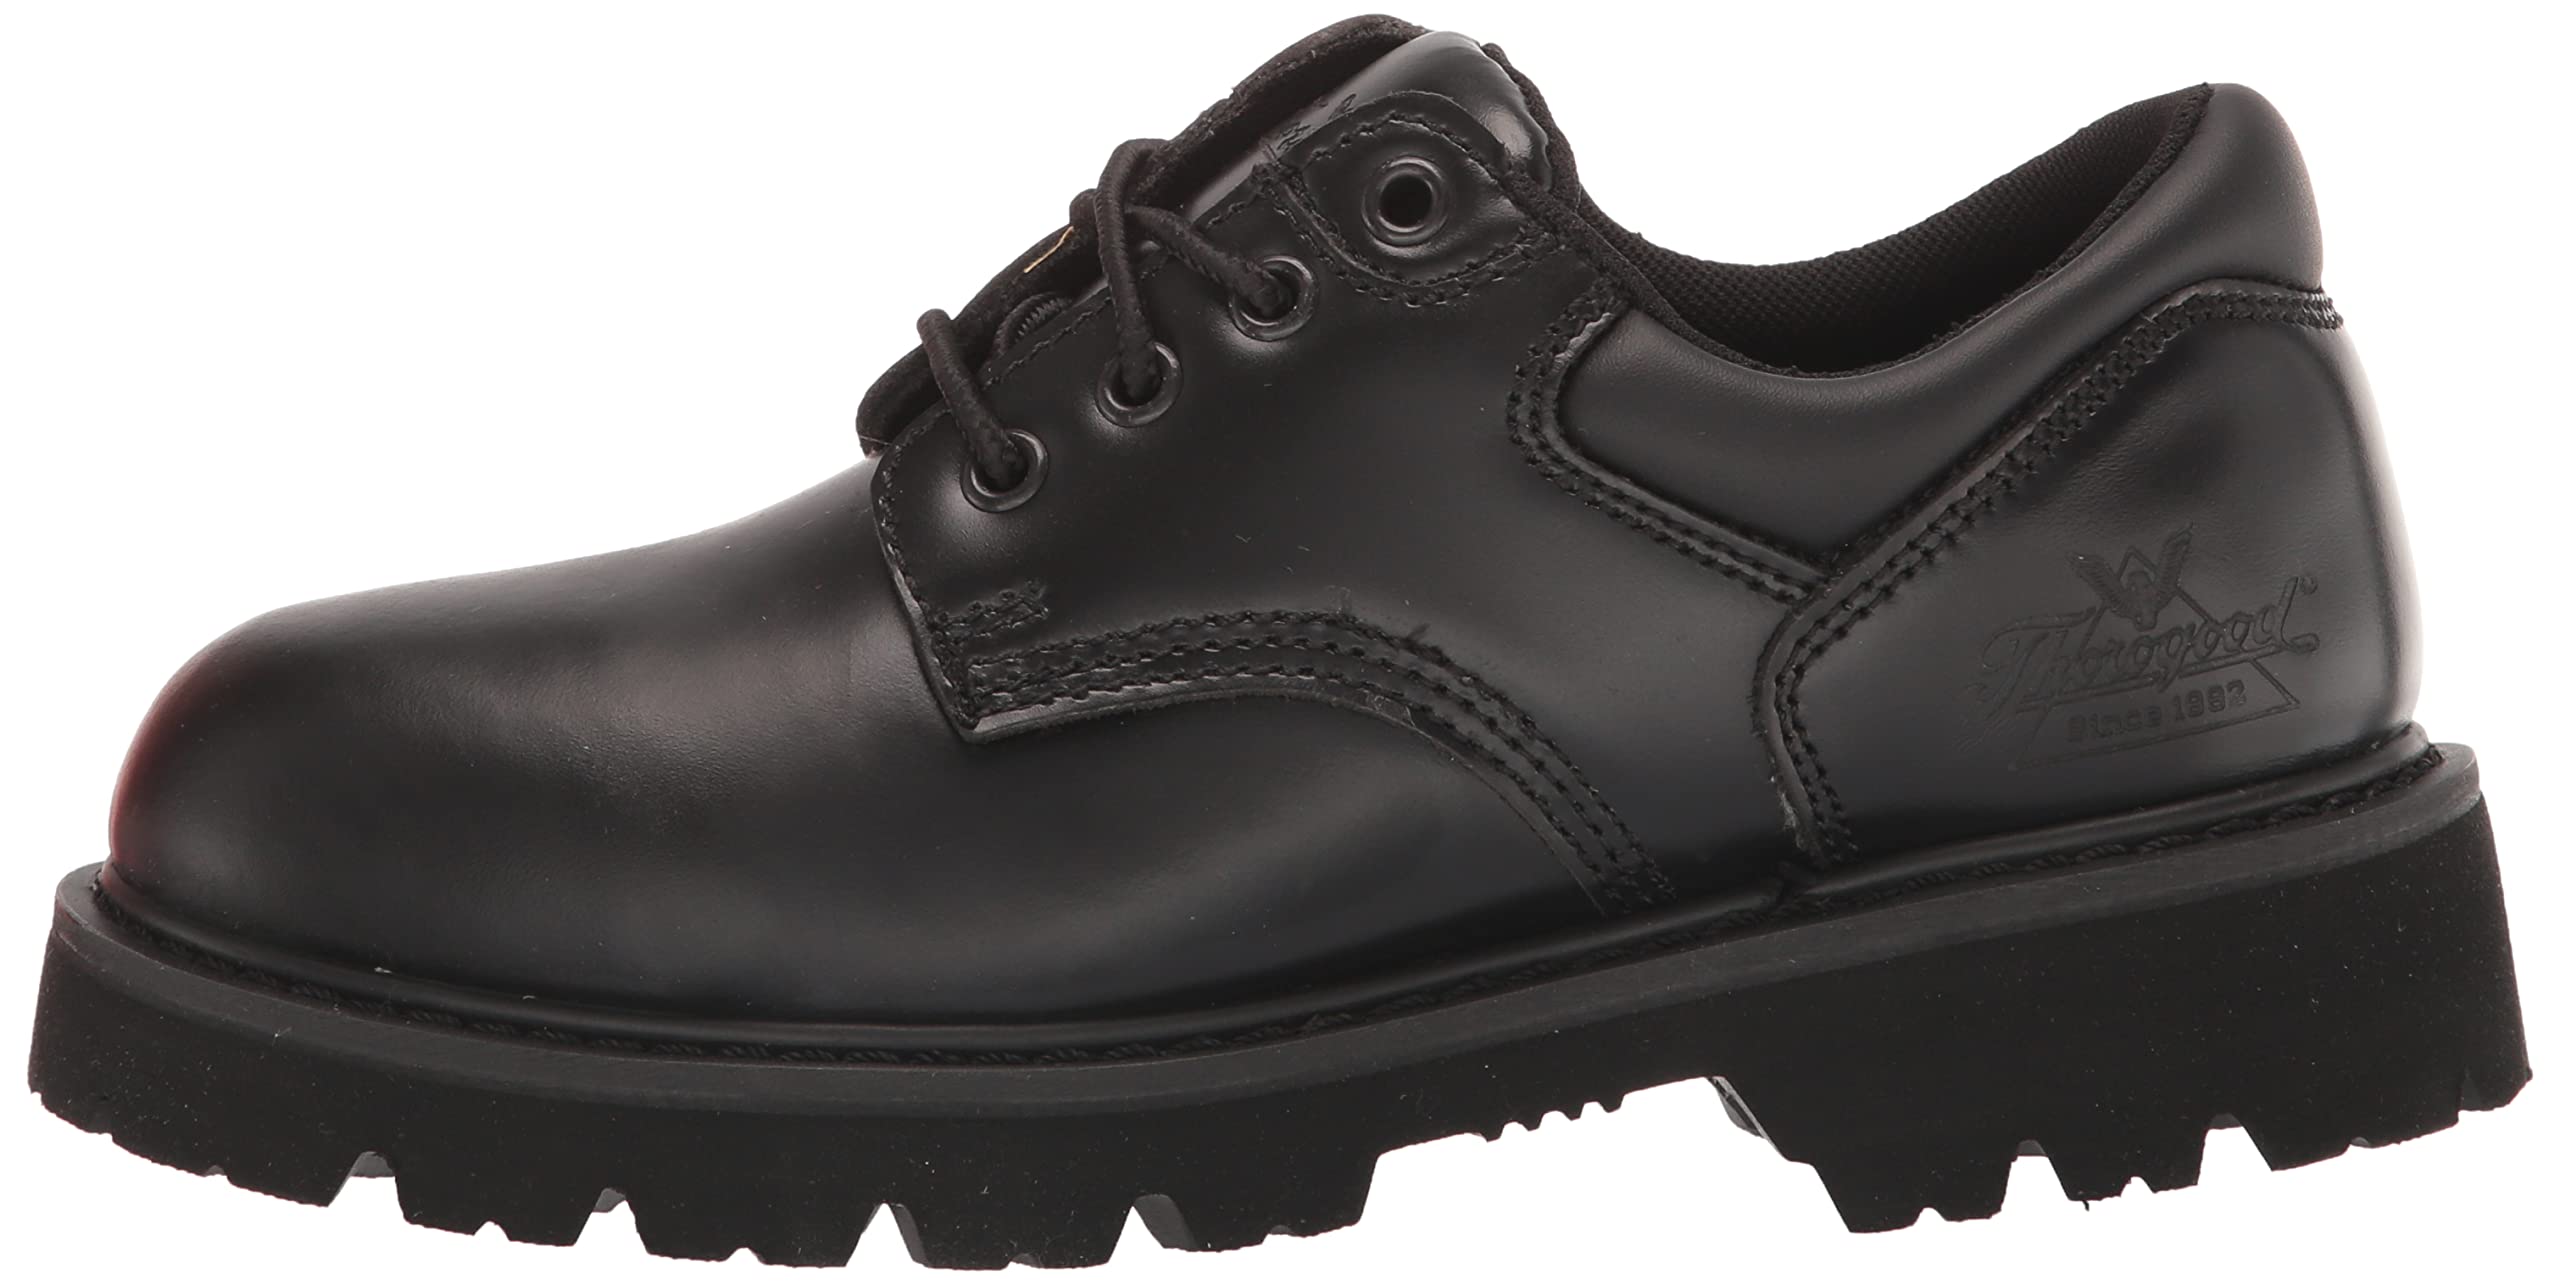 Thorogood Uniform Classics Steel Toe Oxford Work Shoes for Men and Women Featuring Polishable High-Shine Leather, Goodyear Storm Welt, and Non-Slip EVA Lug Outsole